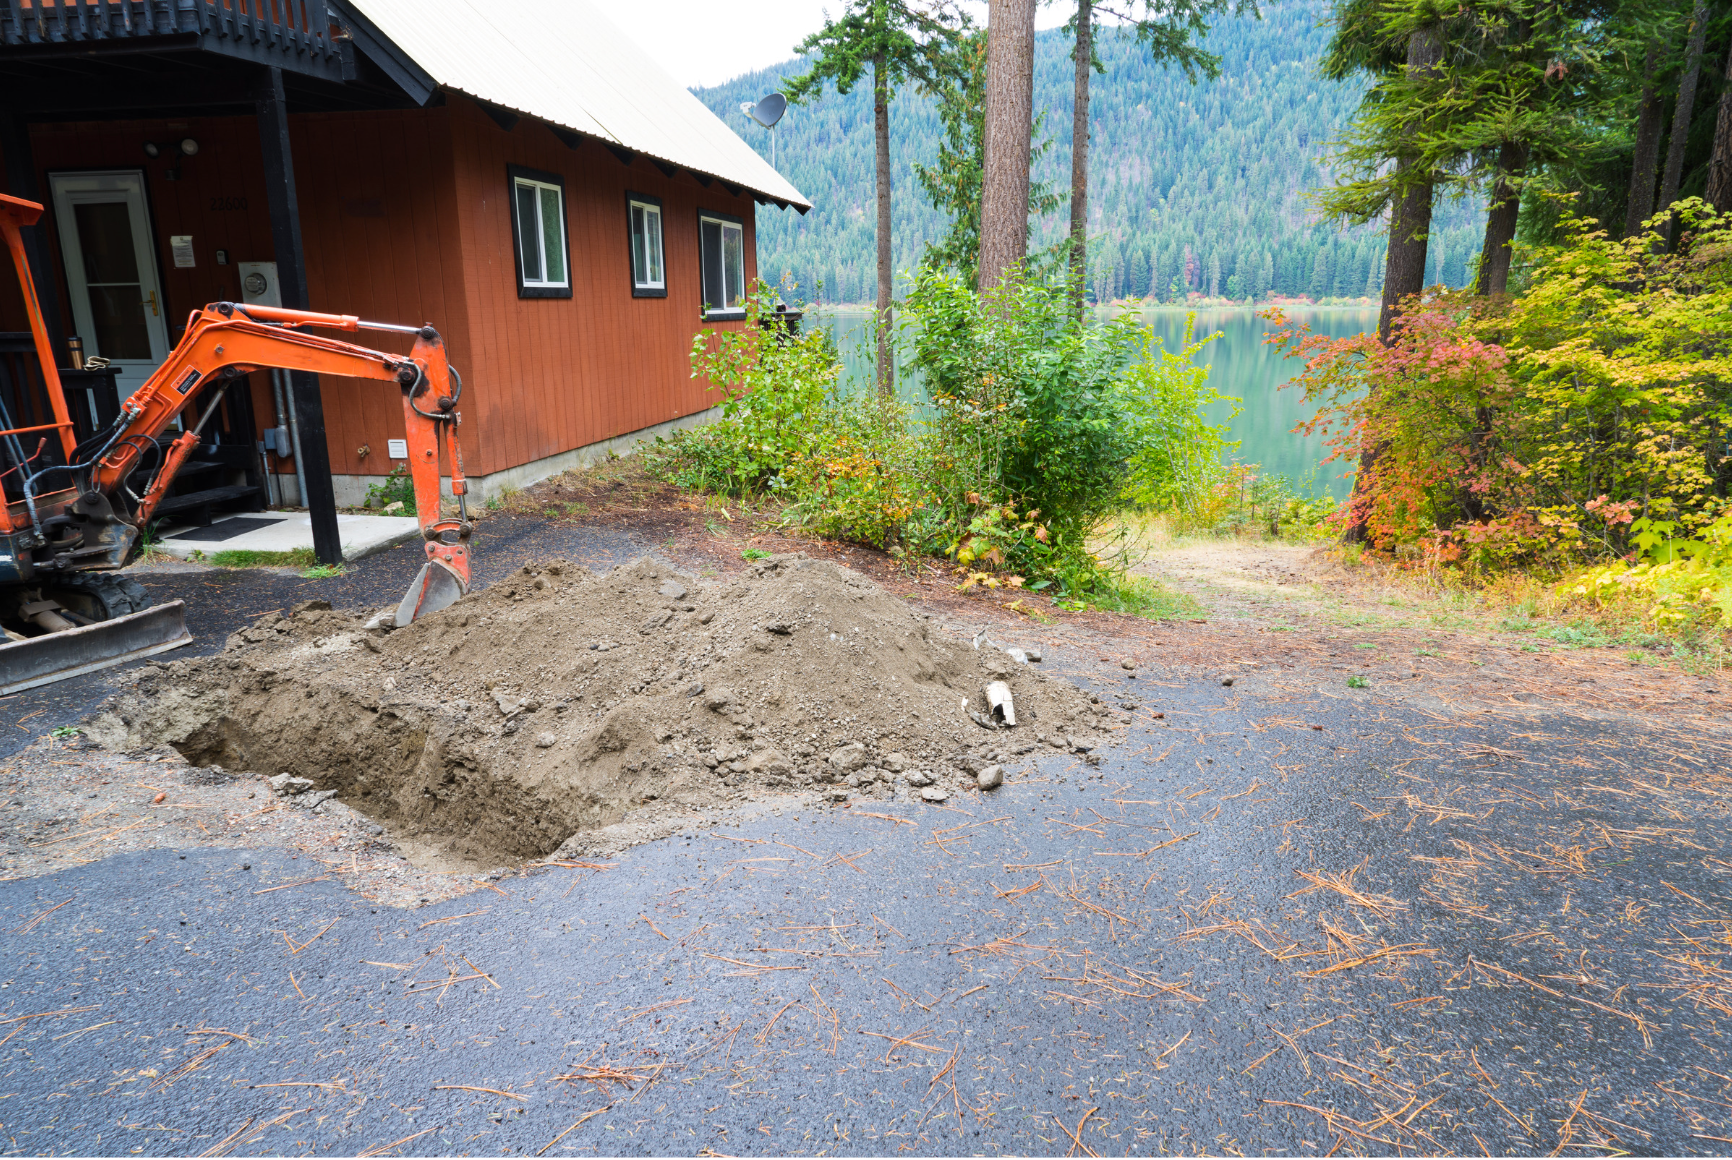 Septic tank in front of the house